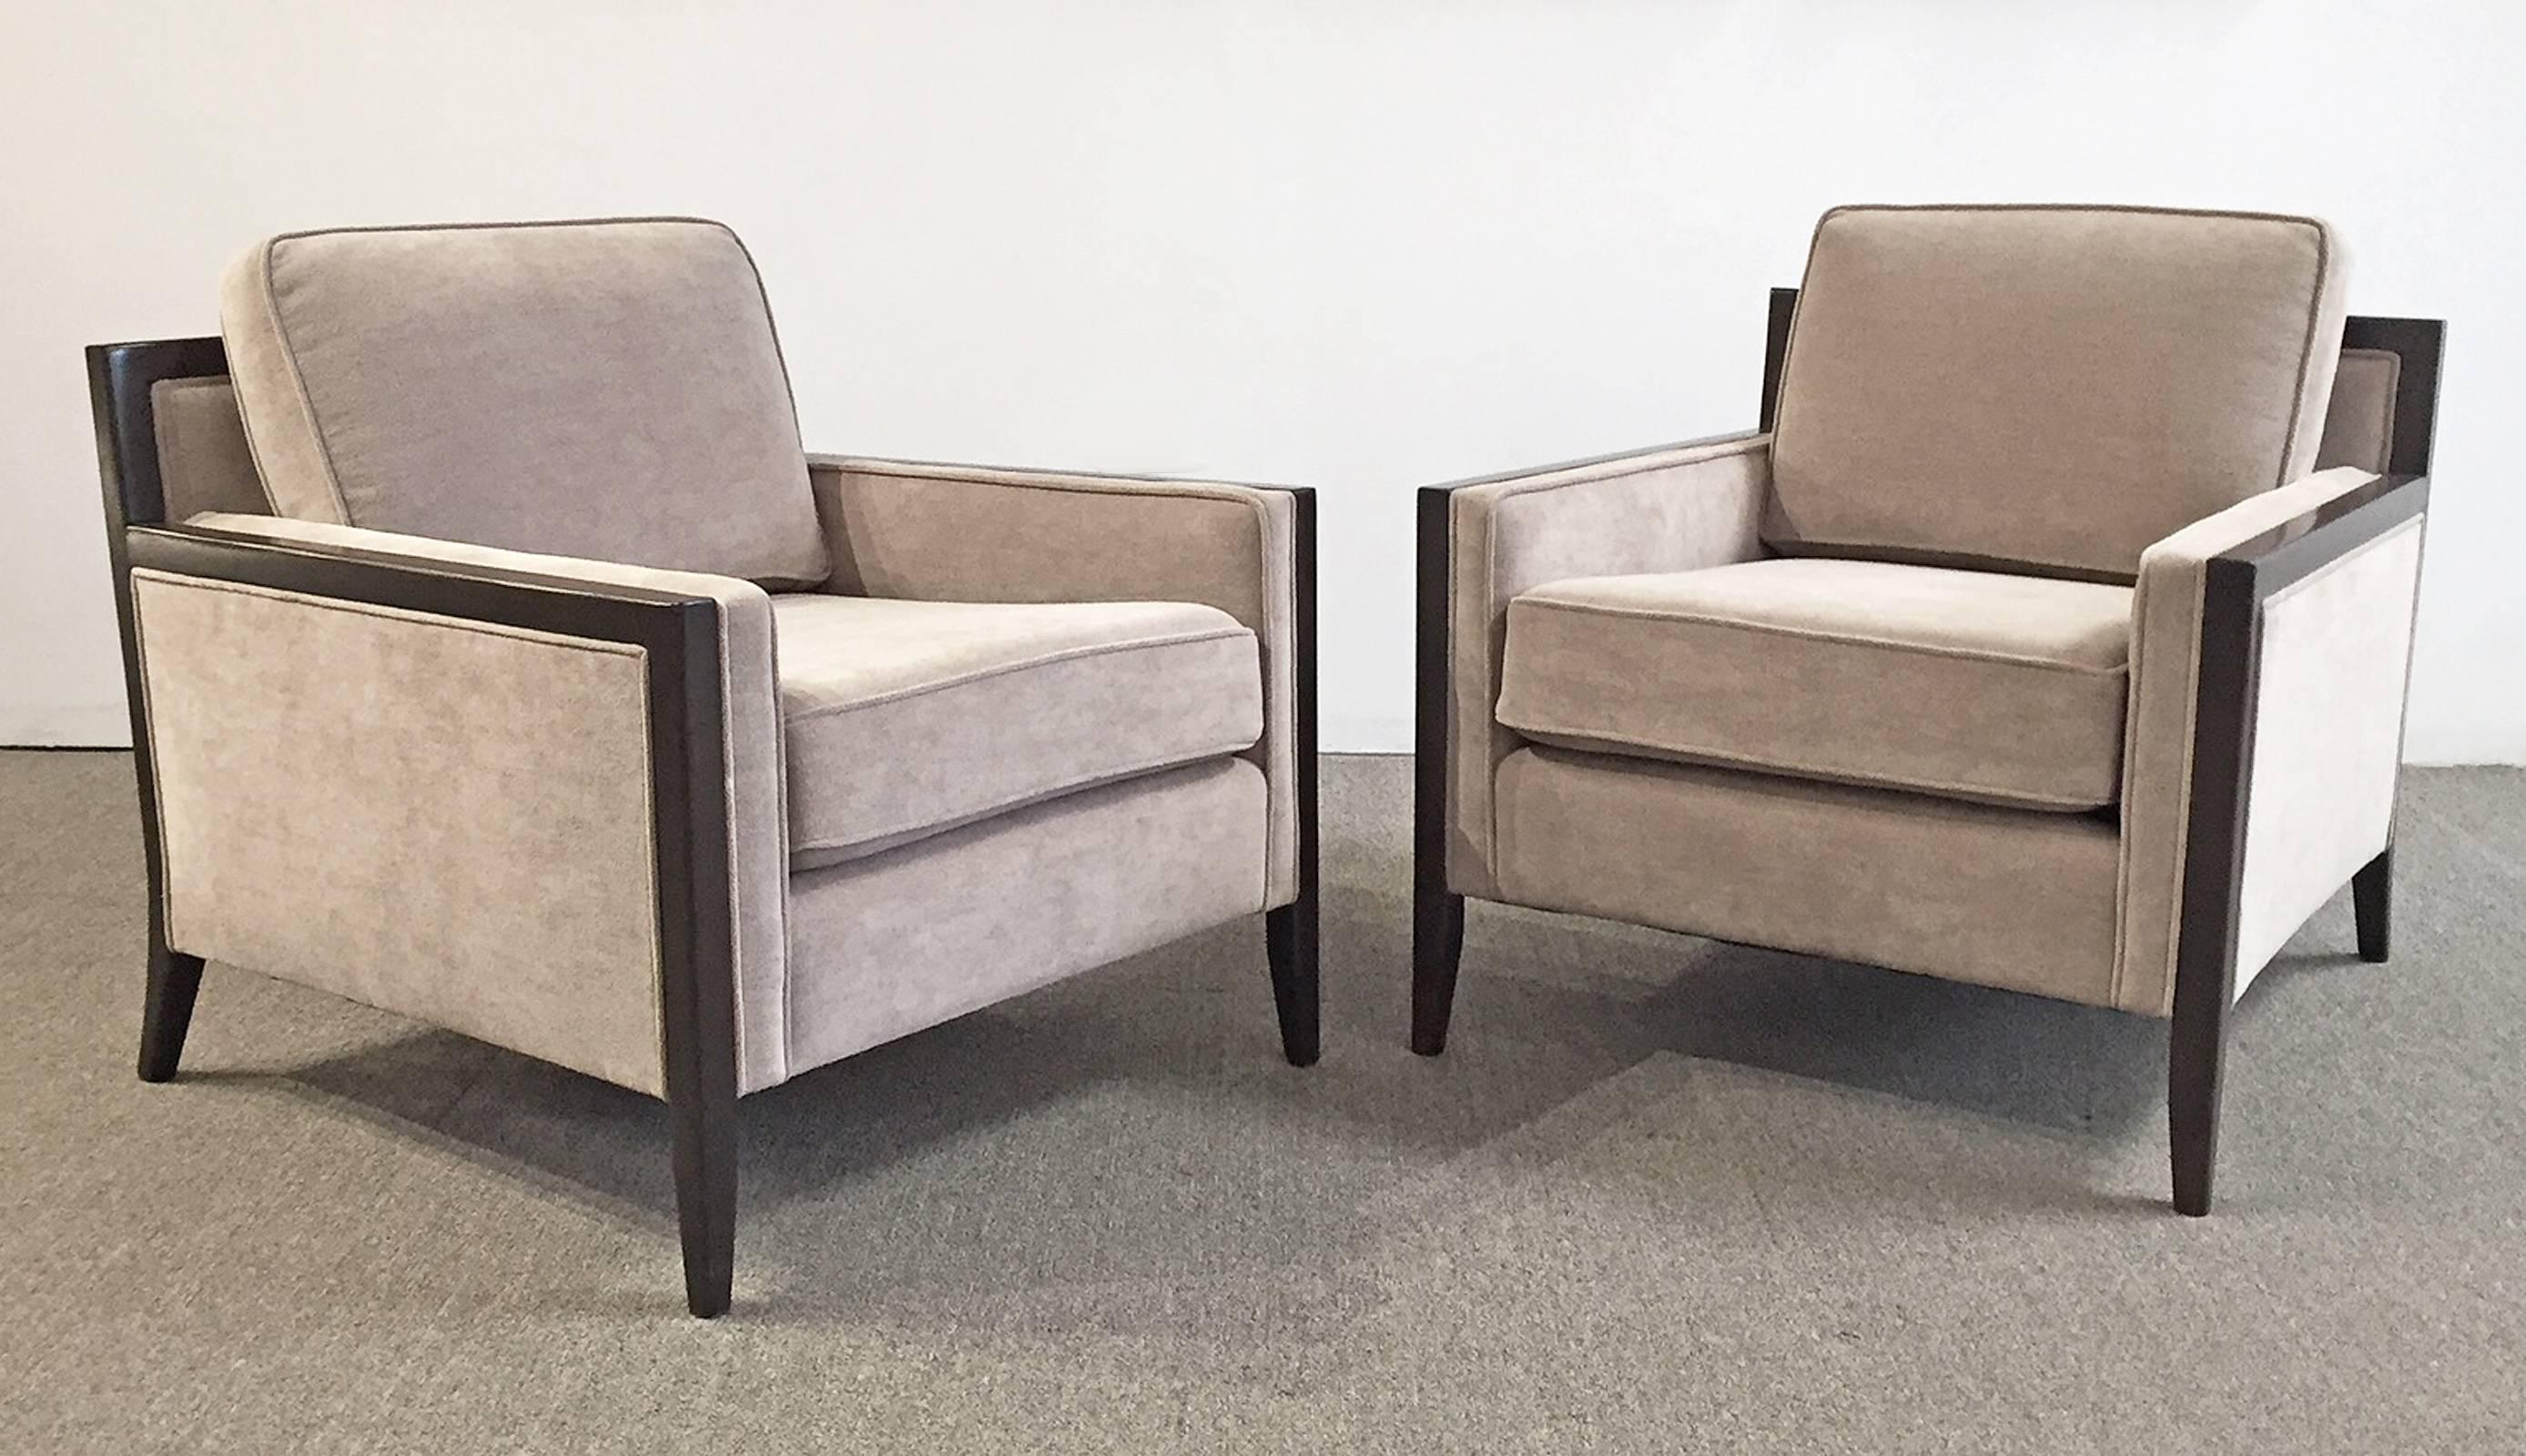 Modern pair of upholstered chairs with stained wood frame. Newly upholstered and restored.
Price is for the pair.